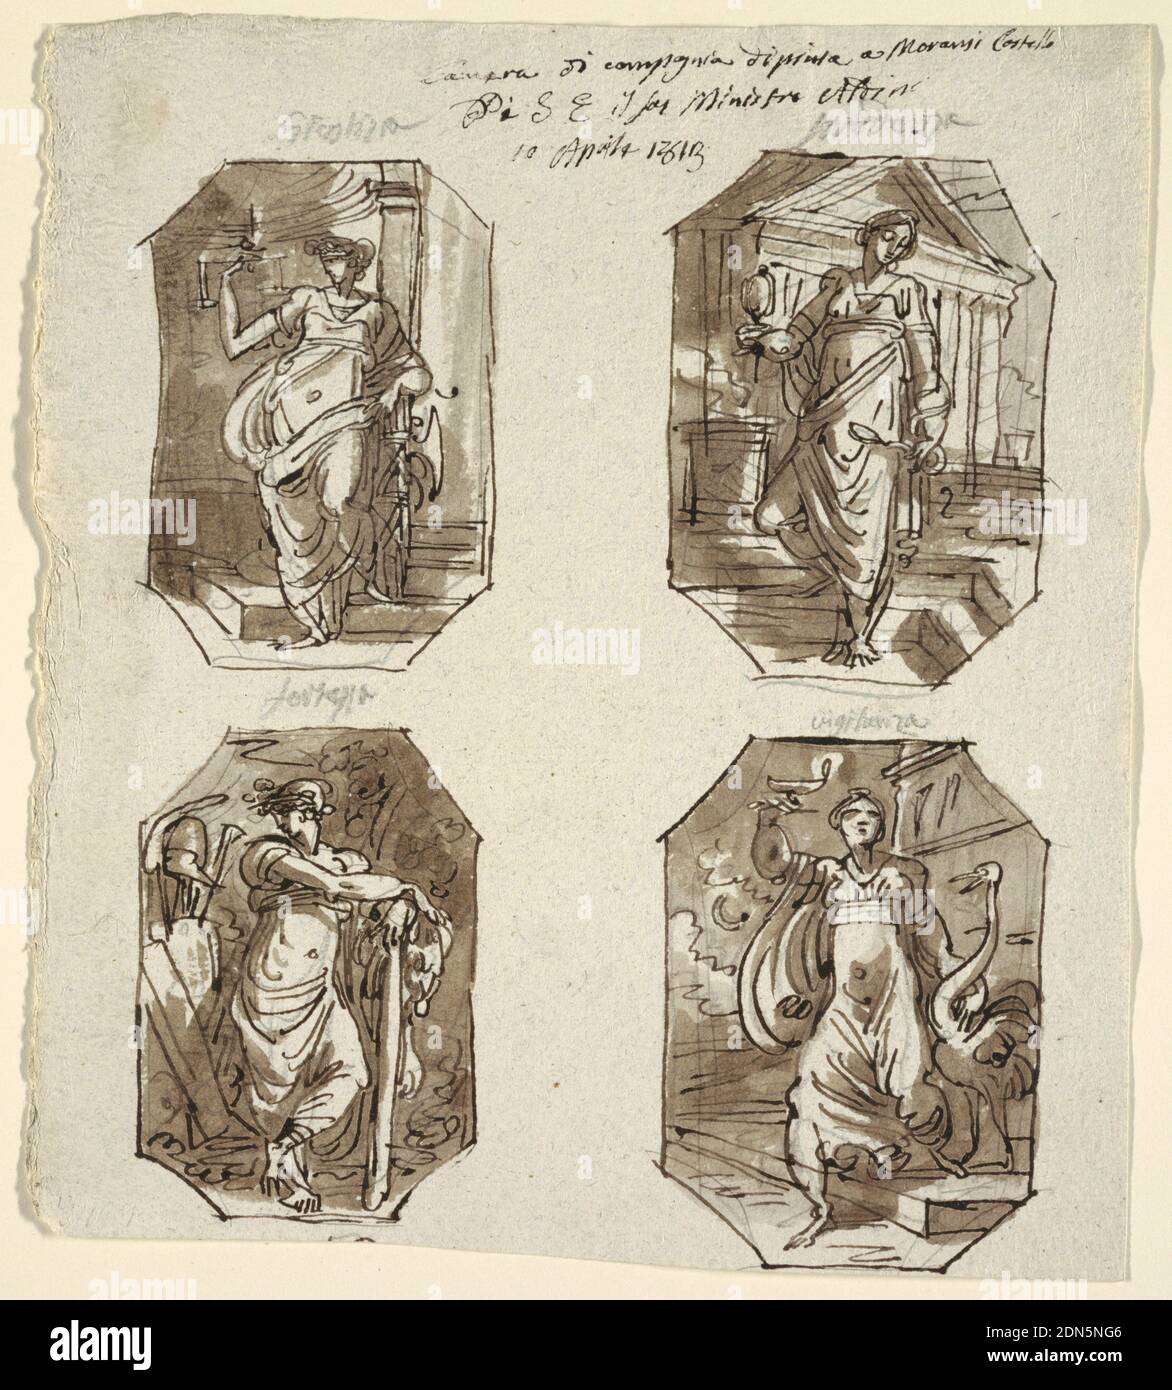 Four Allegories of Virtue, Villa Aldini, Montmorency, France, Felice Giani, Italian, 1758–1823, Pen and brown ink, brush and greyish-brown wash, black chalk on grey textured paper, Four octagonal drawings. Top, left: Justice shown standing on one side of niche, leaning upon fasces and raising pair of scales. Inscribed above in graphite: GIUSTIZA. Top, right: Prudence shown standing in temple precinct, holding looking-glass and snake. Inscribed above in graphite: PRUDENZA. Bottom, left: Strength holding club and shown near trophies. Inscribed above in graphite: FORTEZZA. Stock Photo